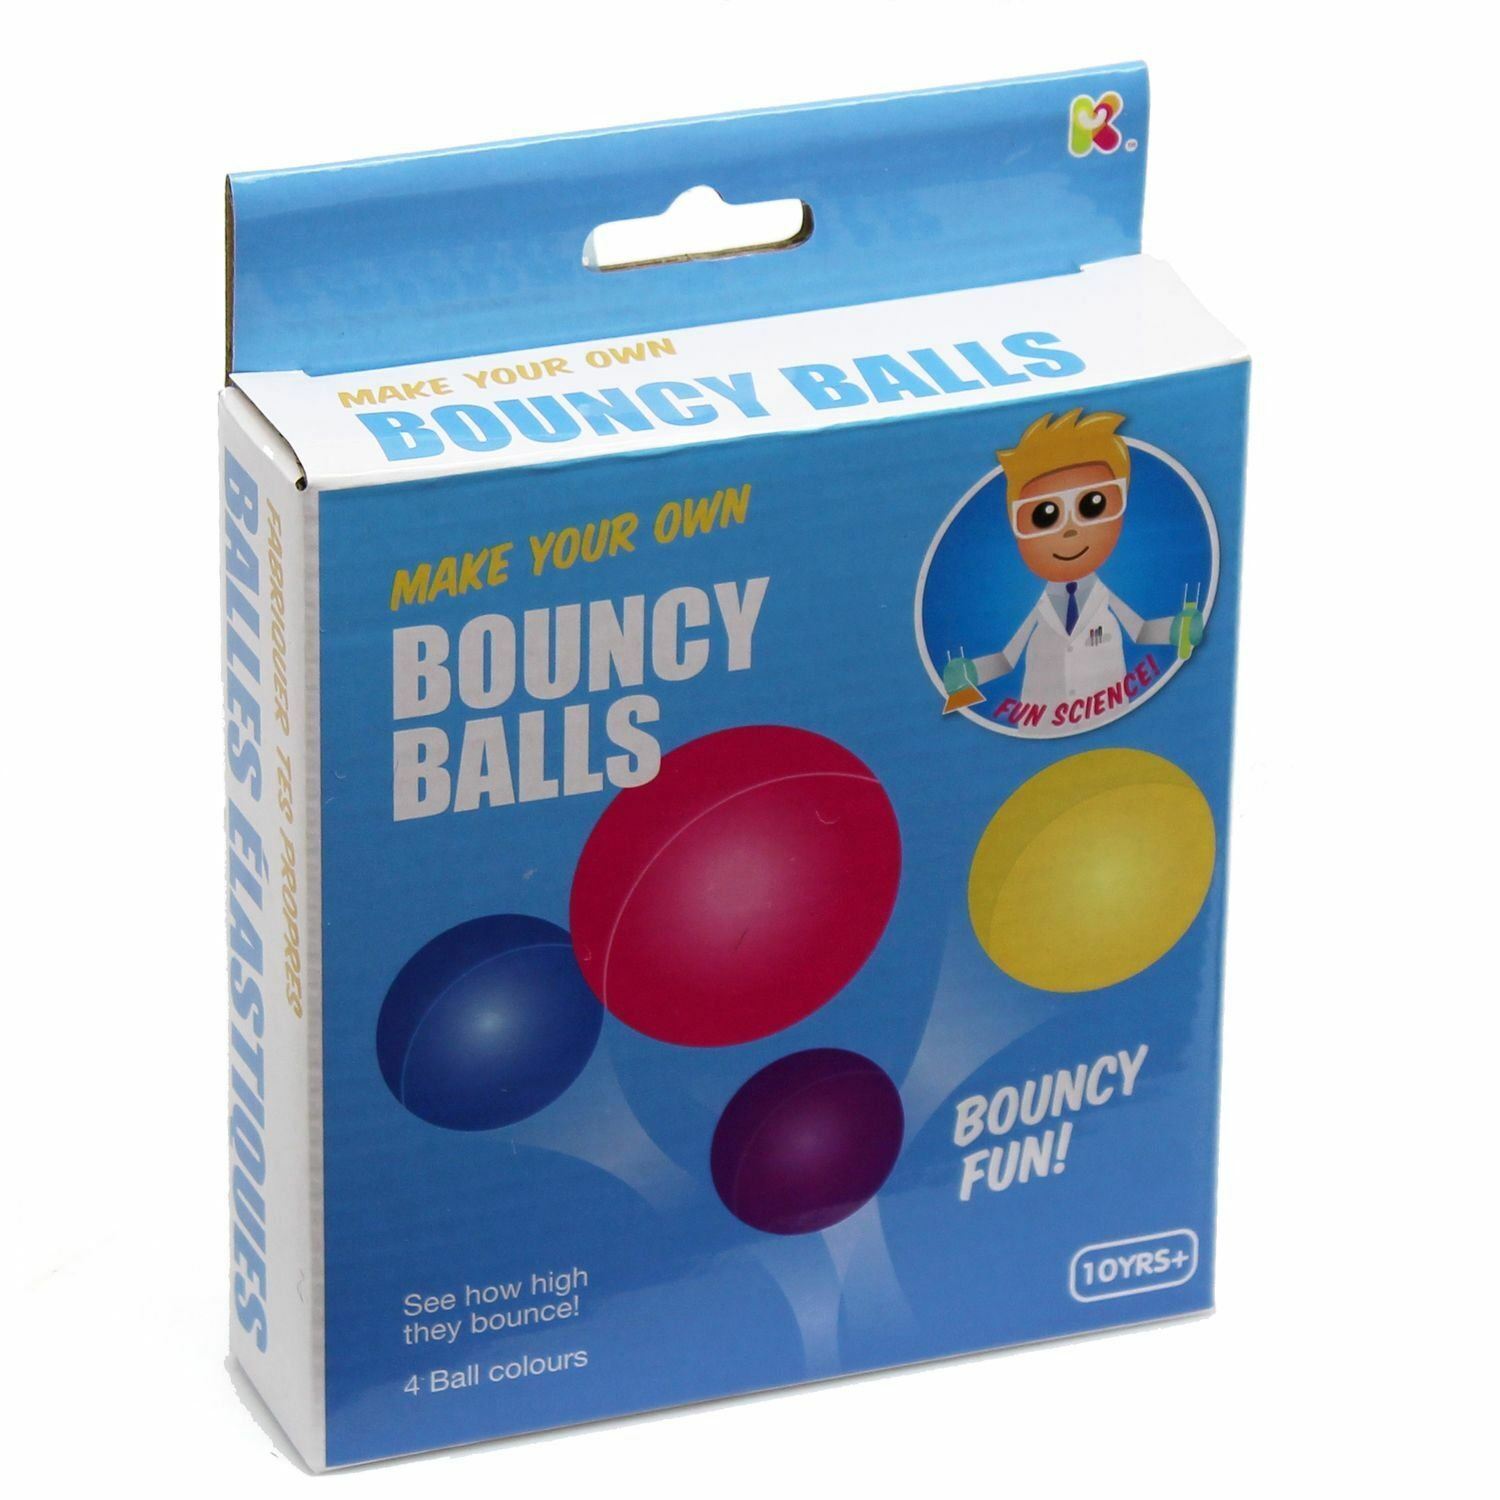 MAKE YOUR OWN BOUNCY BALL